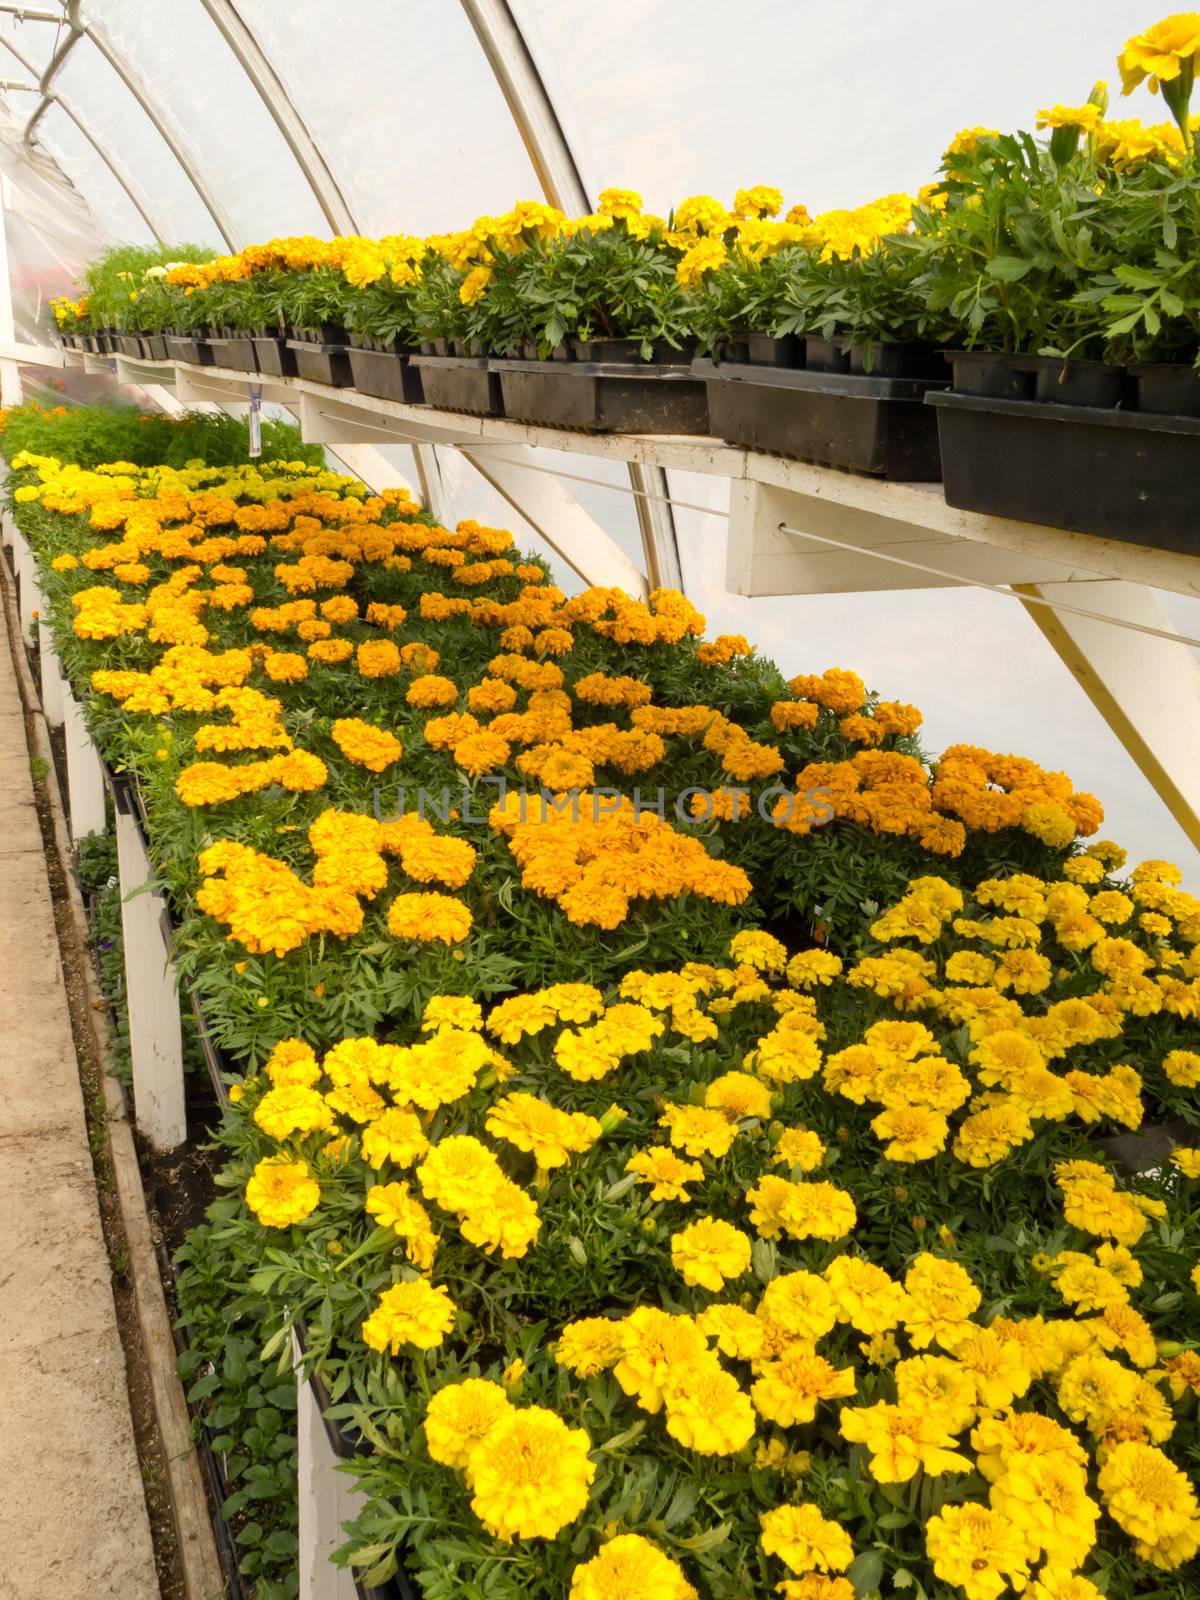 Inside commercial horticulture greenhouse of garden center selling already blooming marigold for bedding plants.